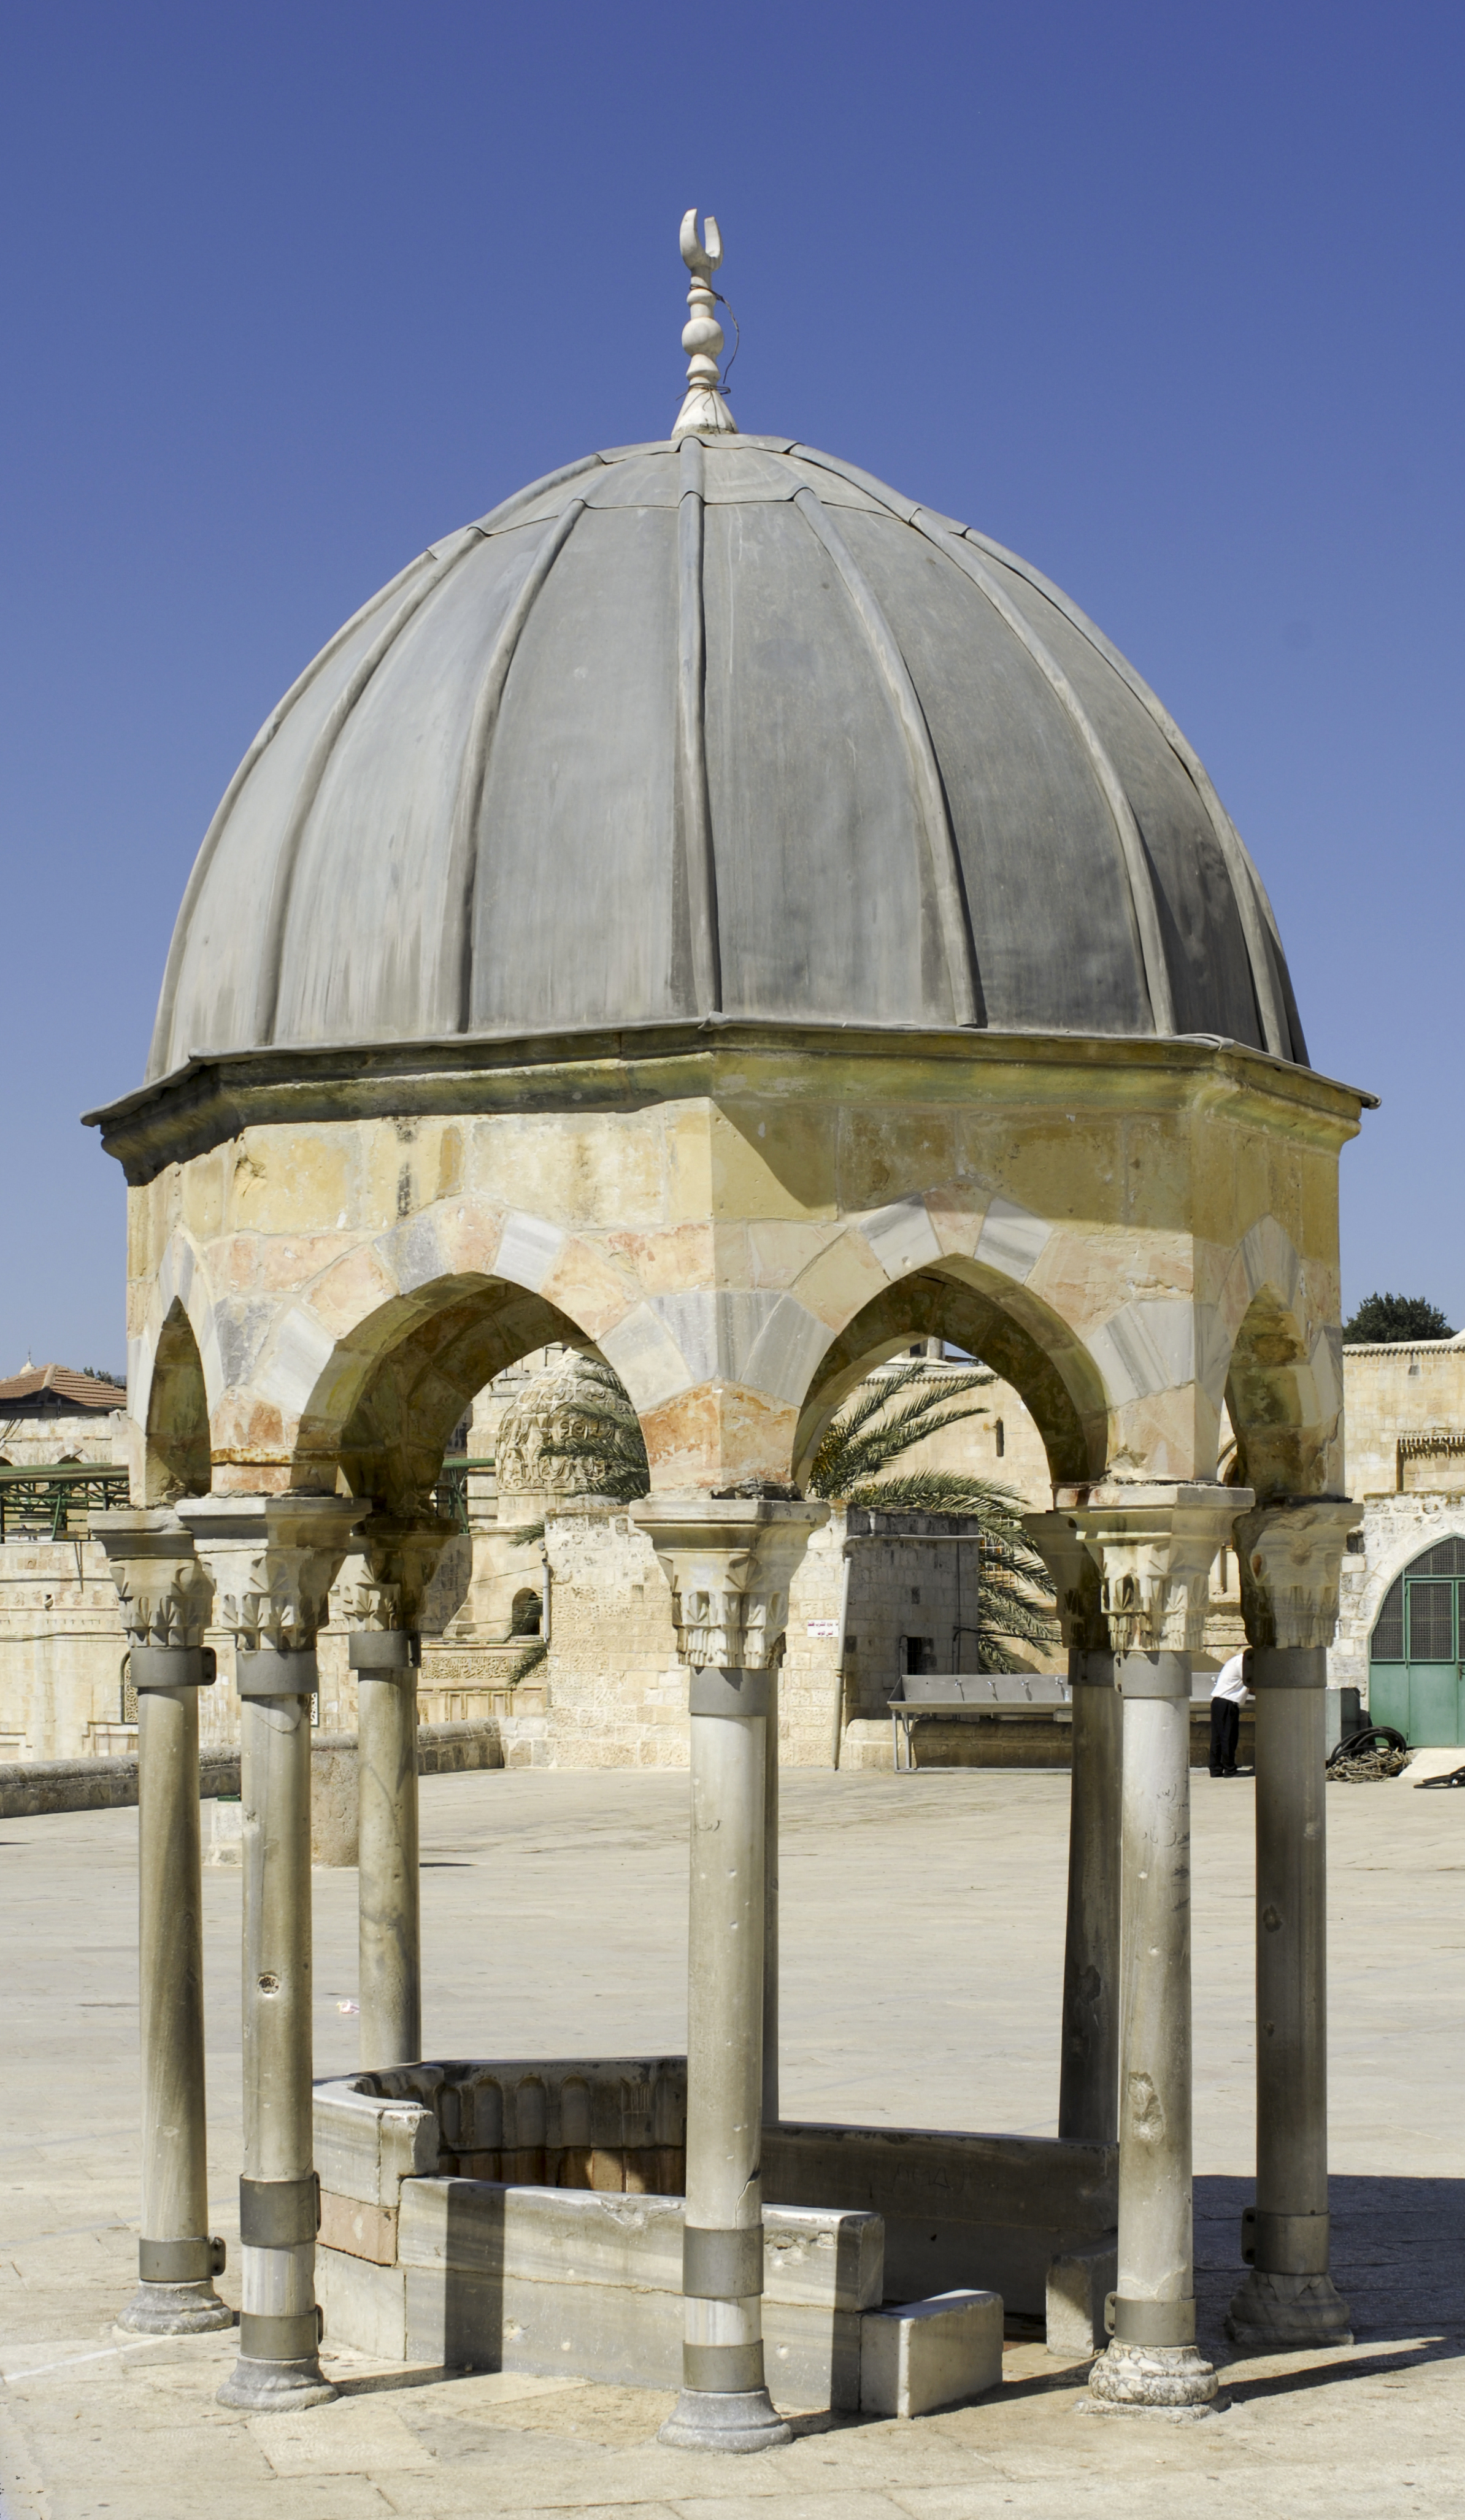 Dome of the Prophet (Temple Mount, 2008)